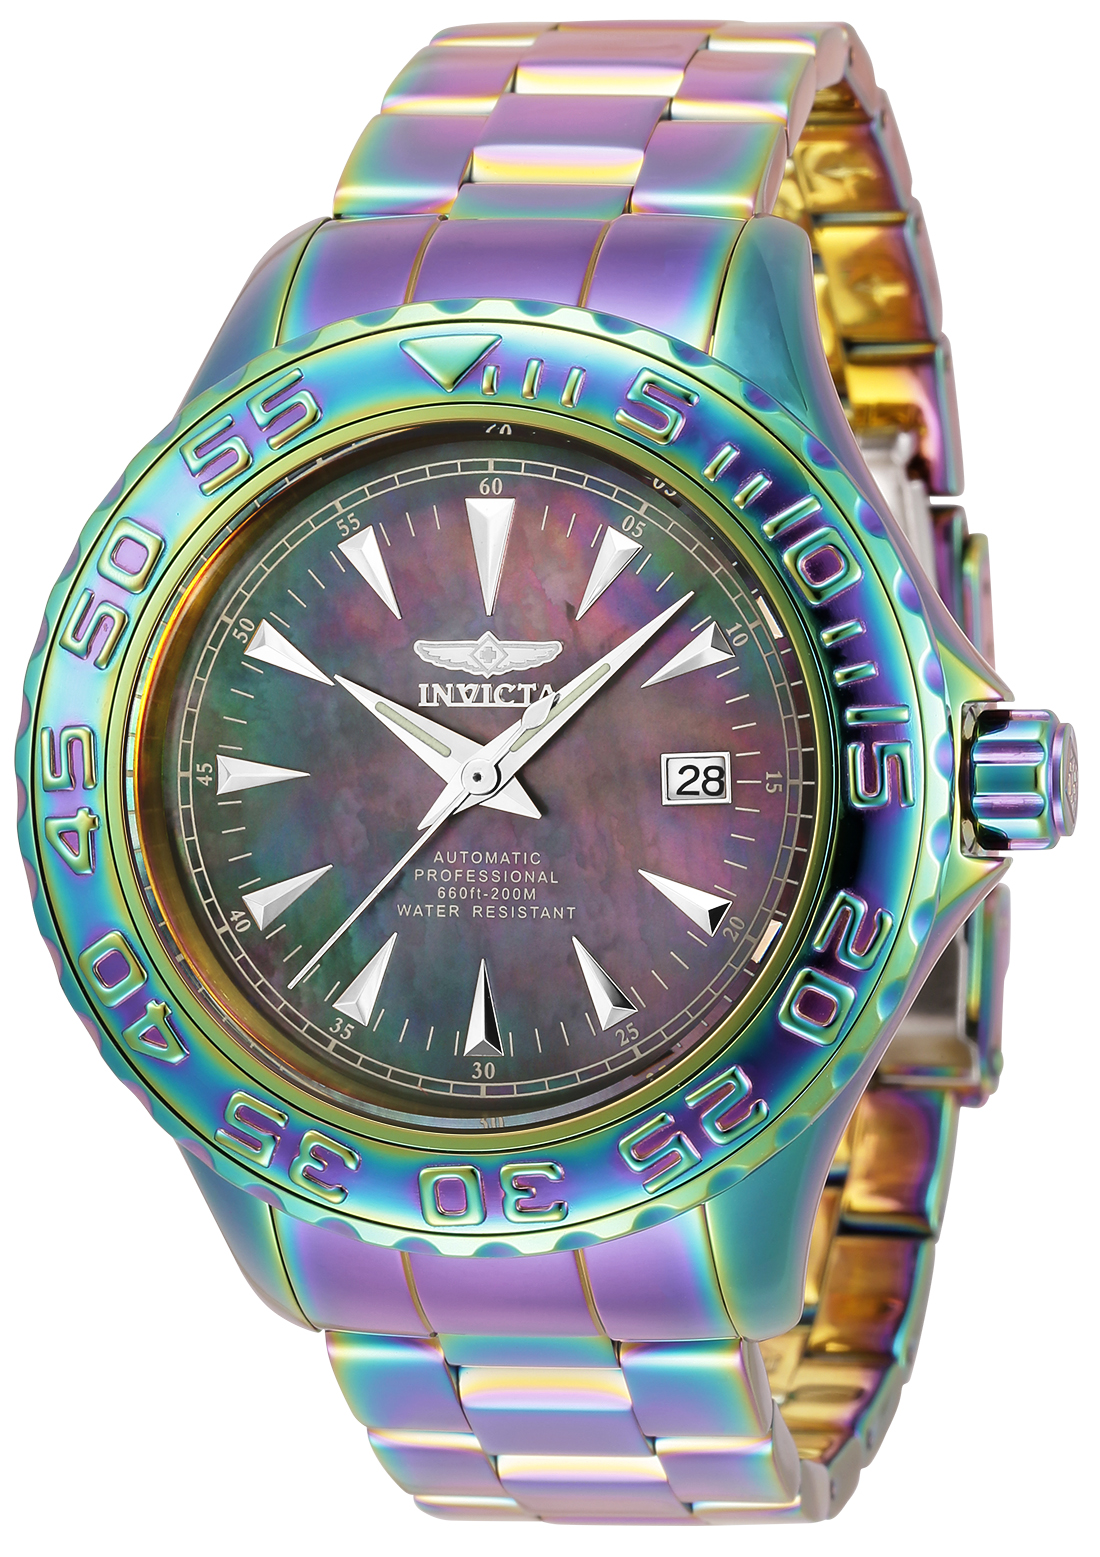 Invicta Pro Diver Automatic Mens Watch - 47mm Stainless Steel Case, Stainless Steel Band, Iridescent (34106)